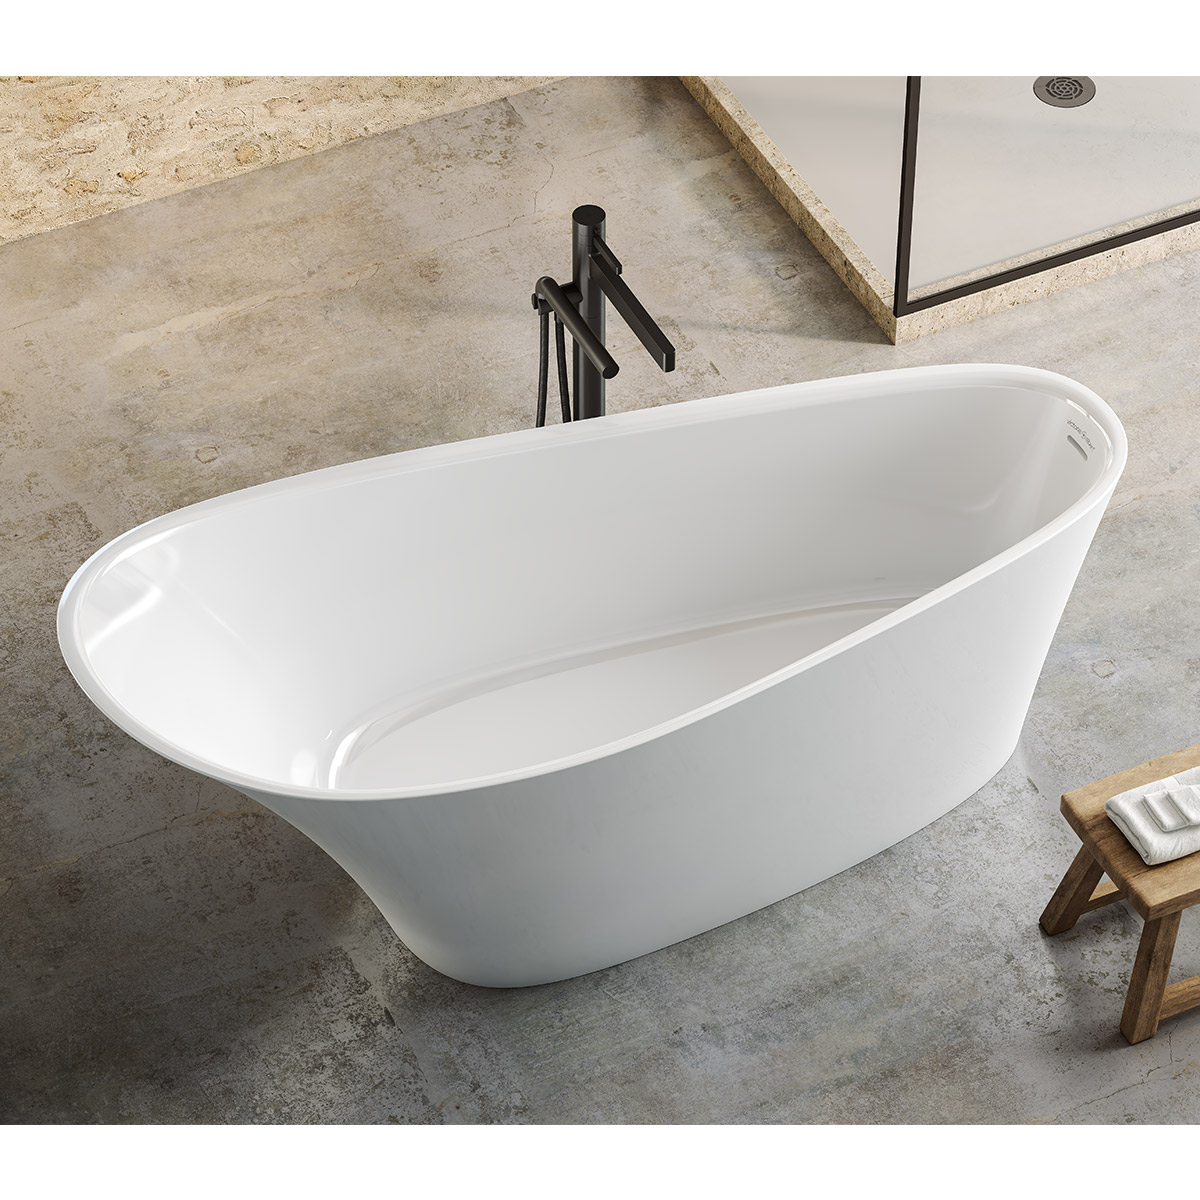 Victoira + Albert Ledro volcanic limestone sustainable water efficient bath is available in gloss white or matt white as standard, or custom colour by special order. Distributed in Australia by Luxe by Design, Brisbane.